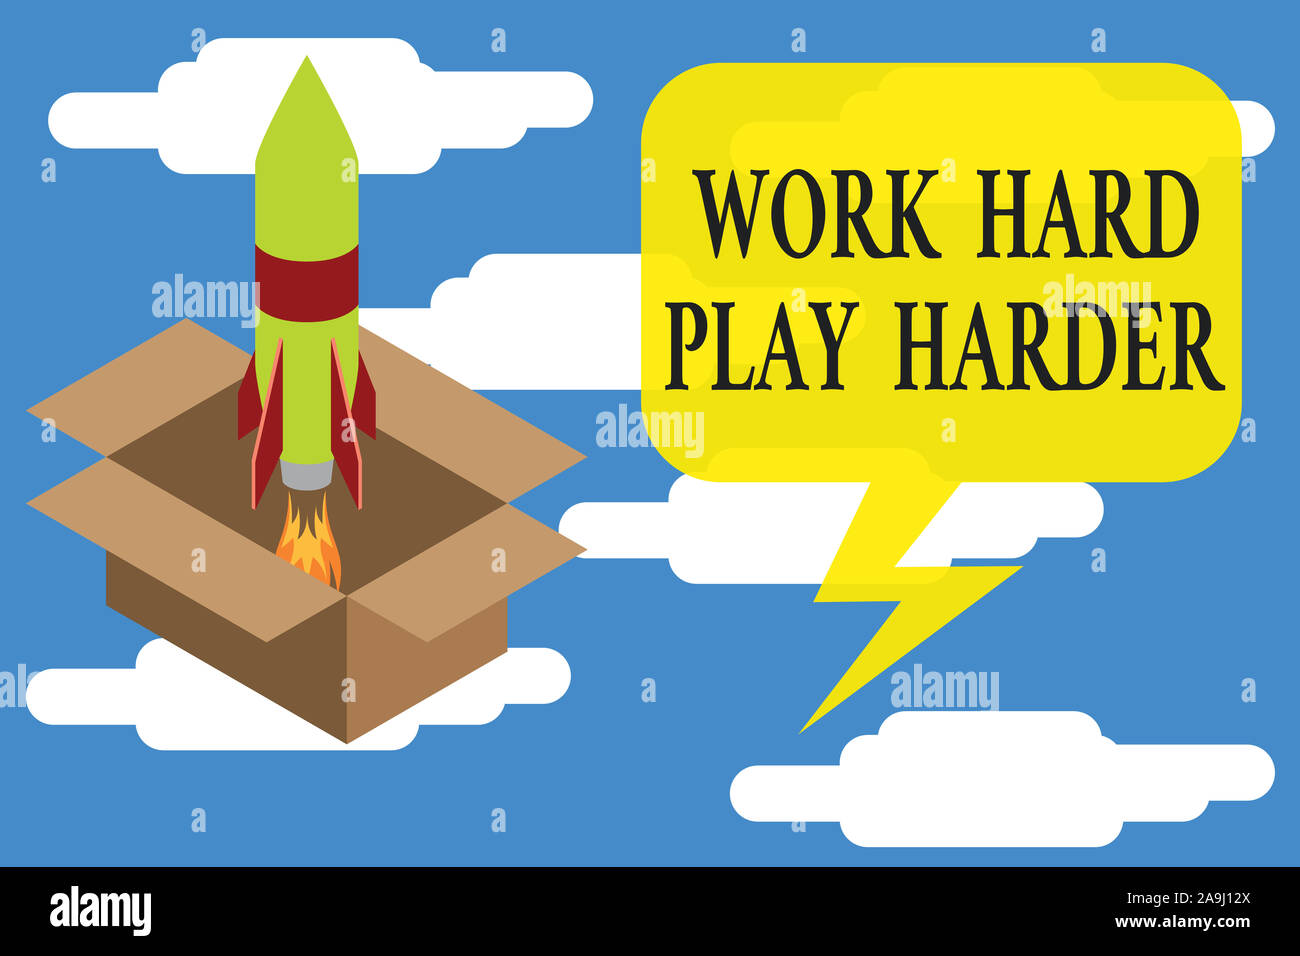 Play Hard Work Harder Meaning